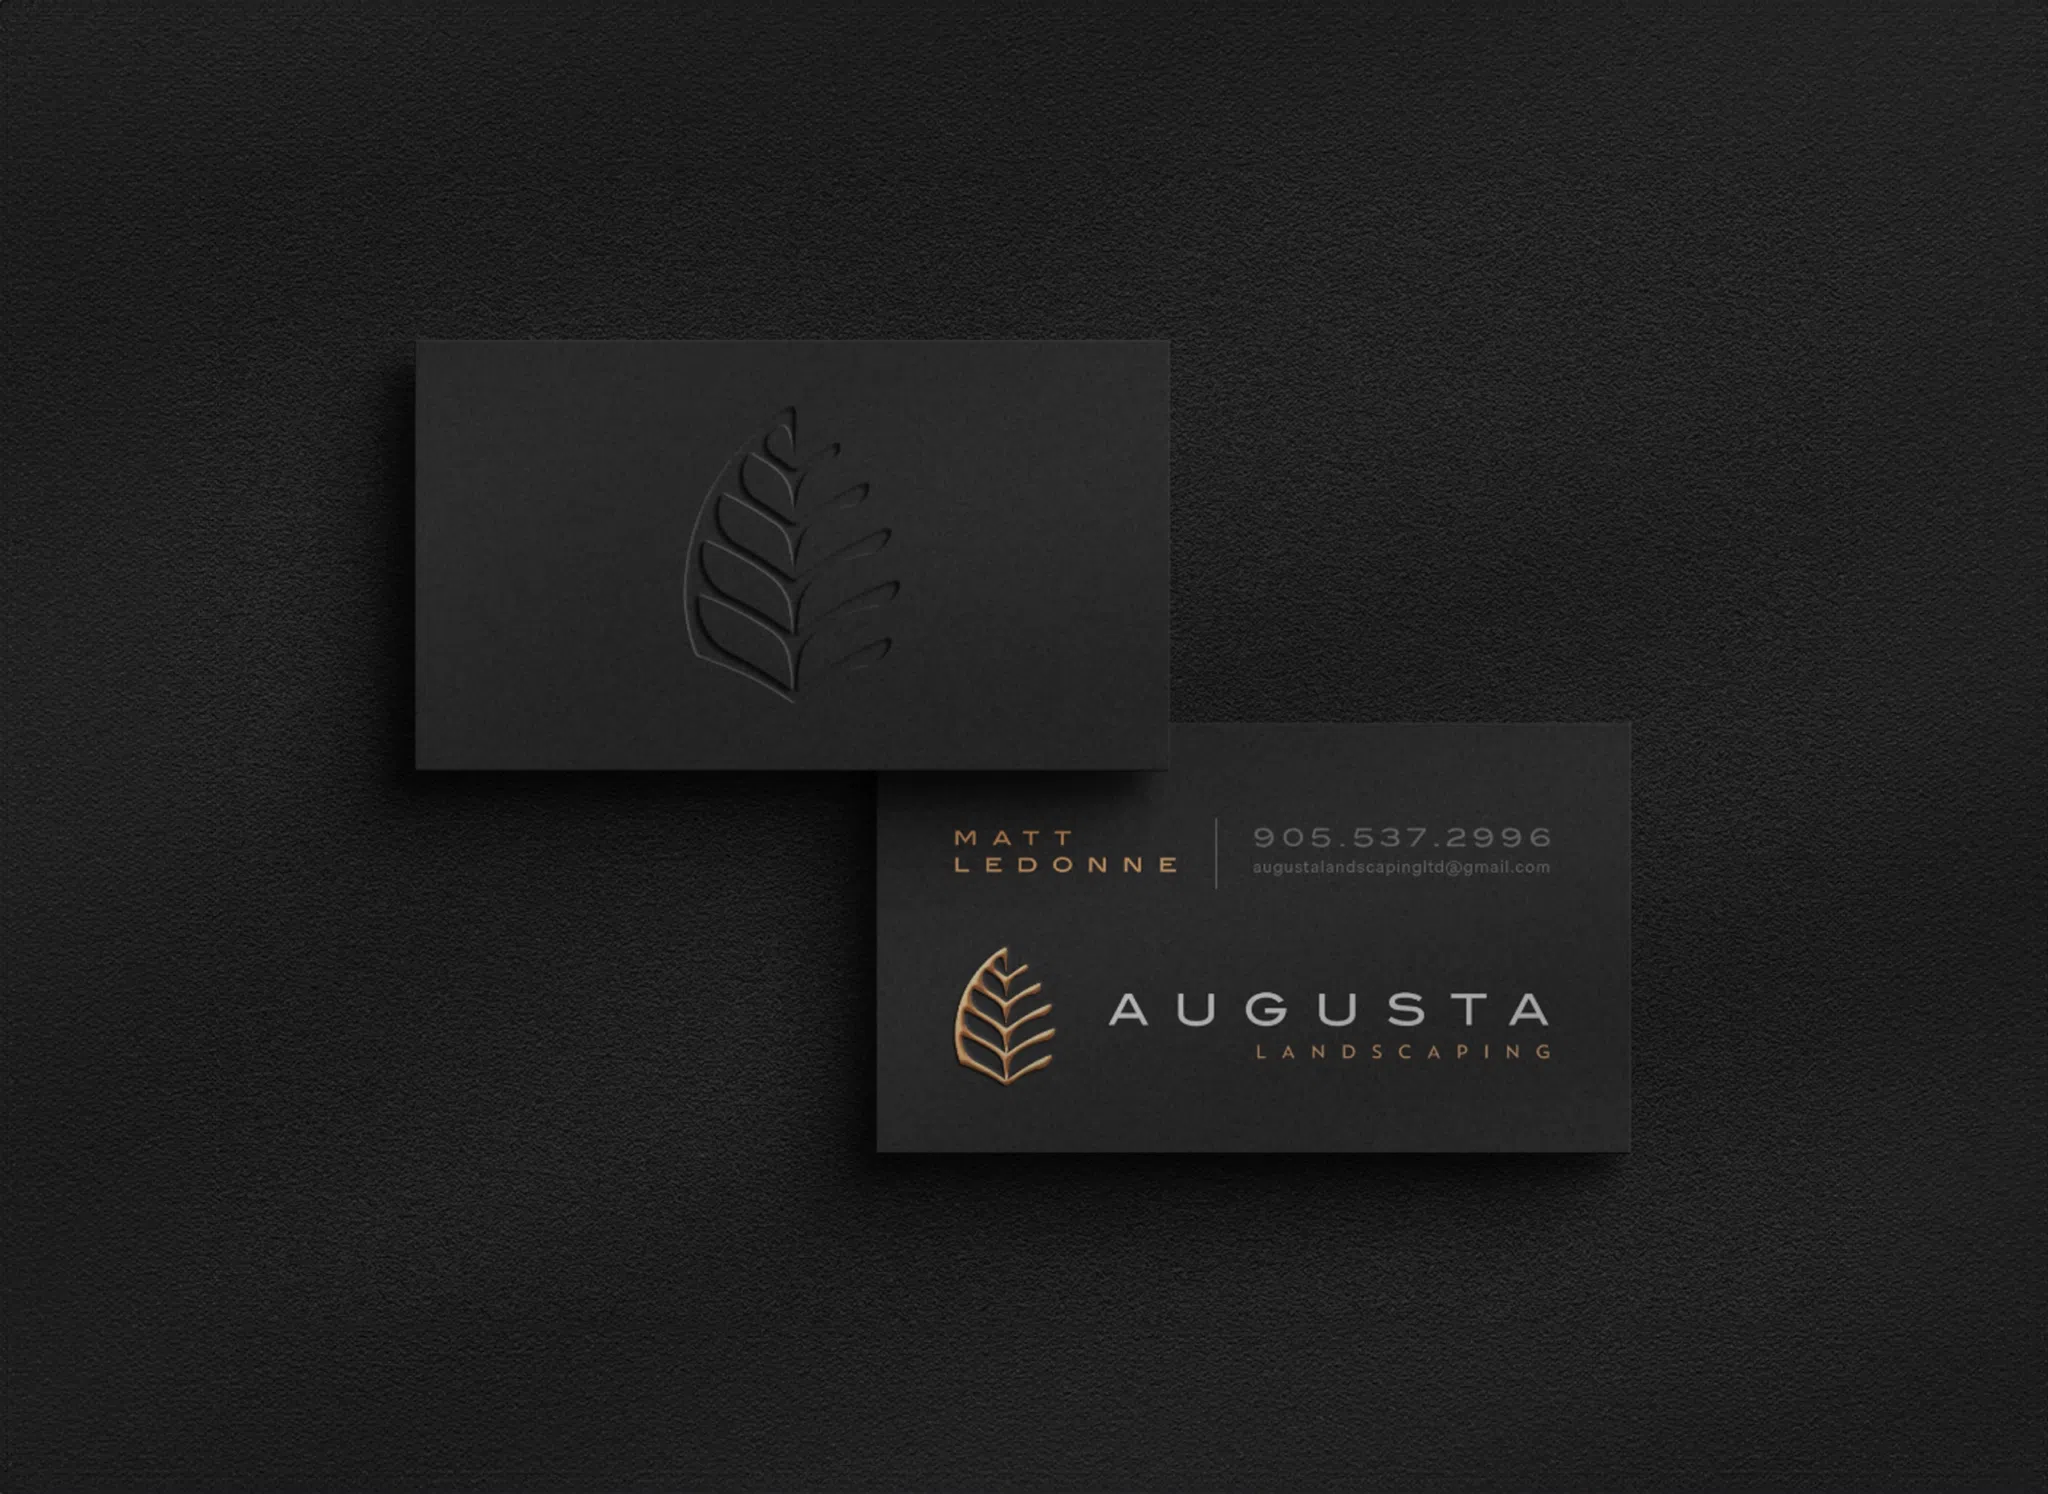 ripple-projects-augusta-cards